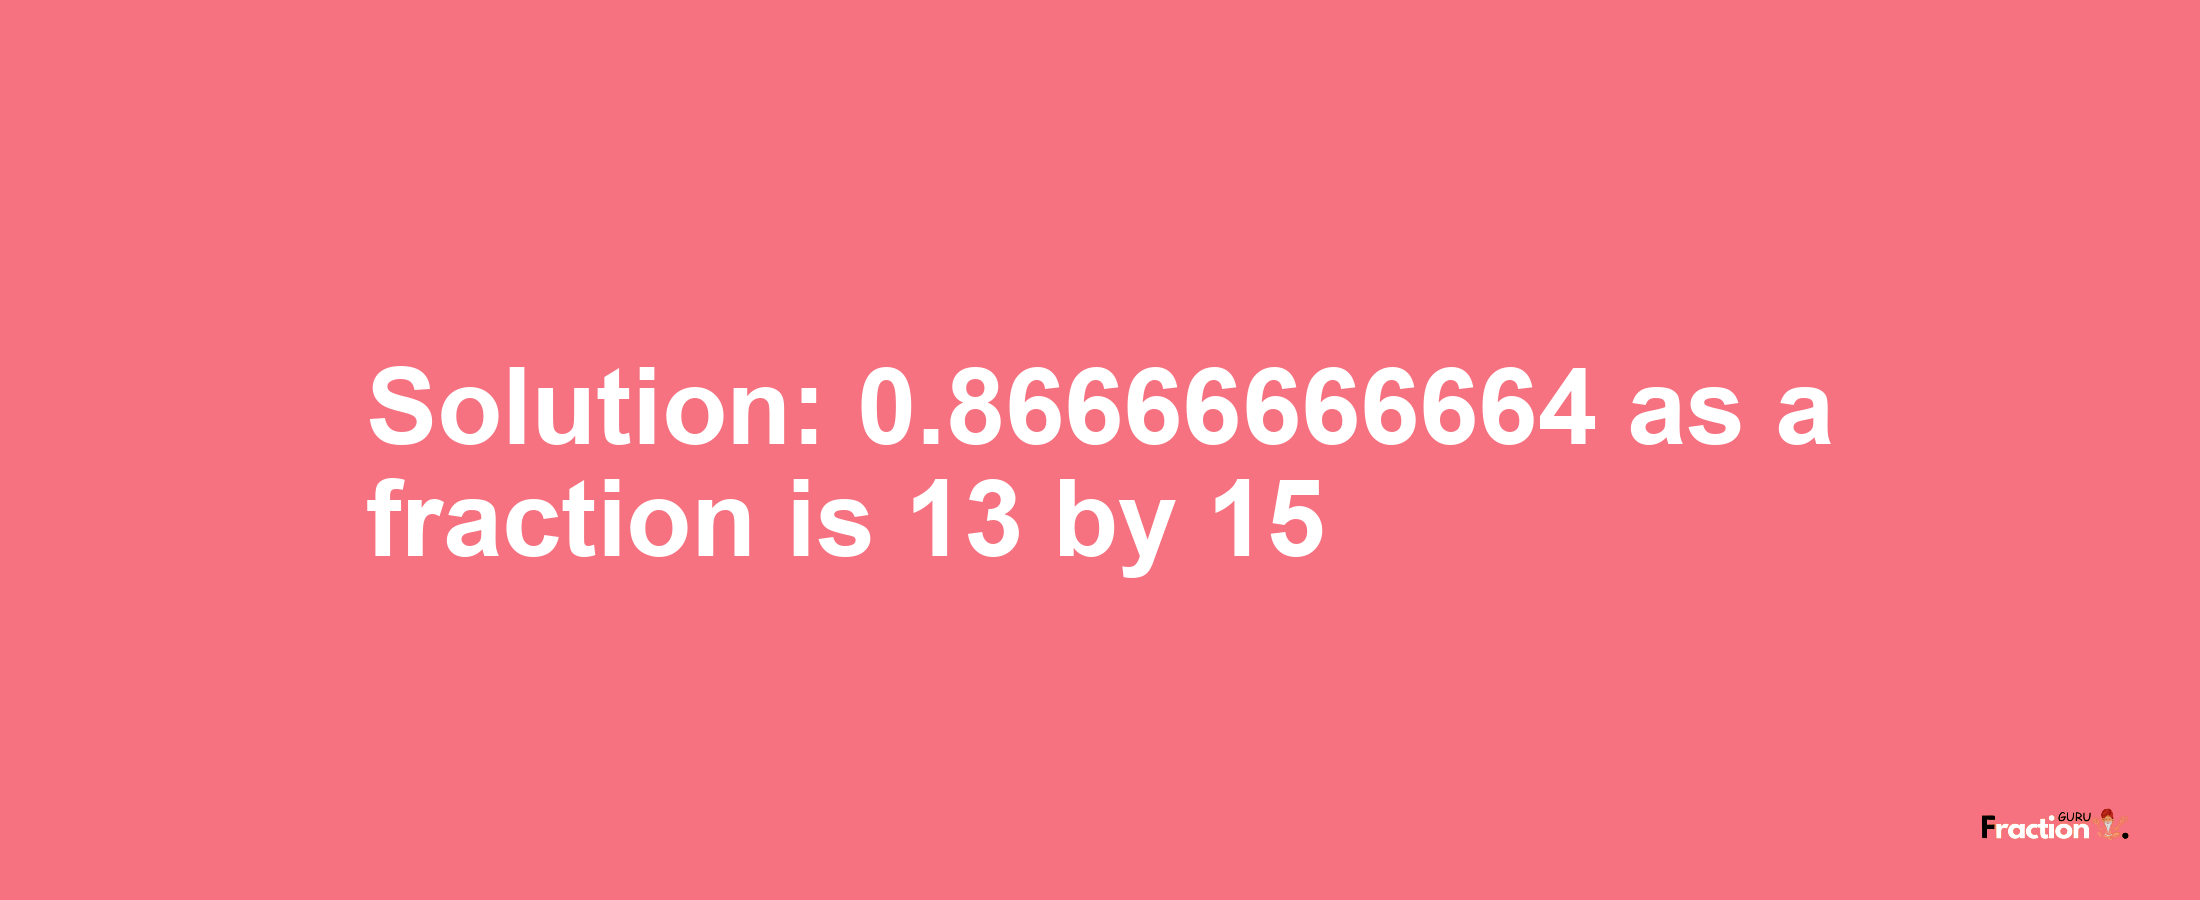 Solution:0.86666666664 as a fraction is 13/15